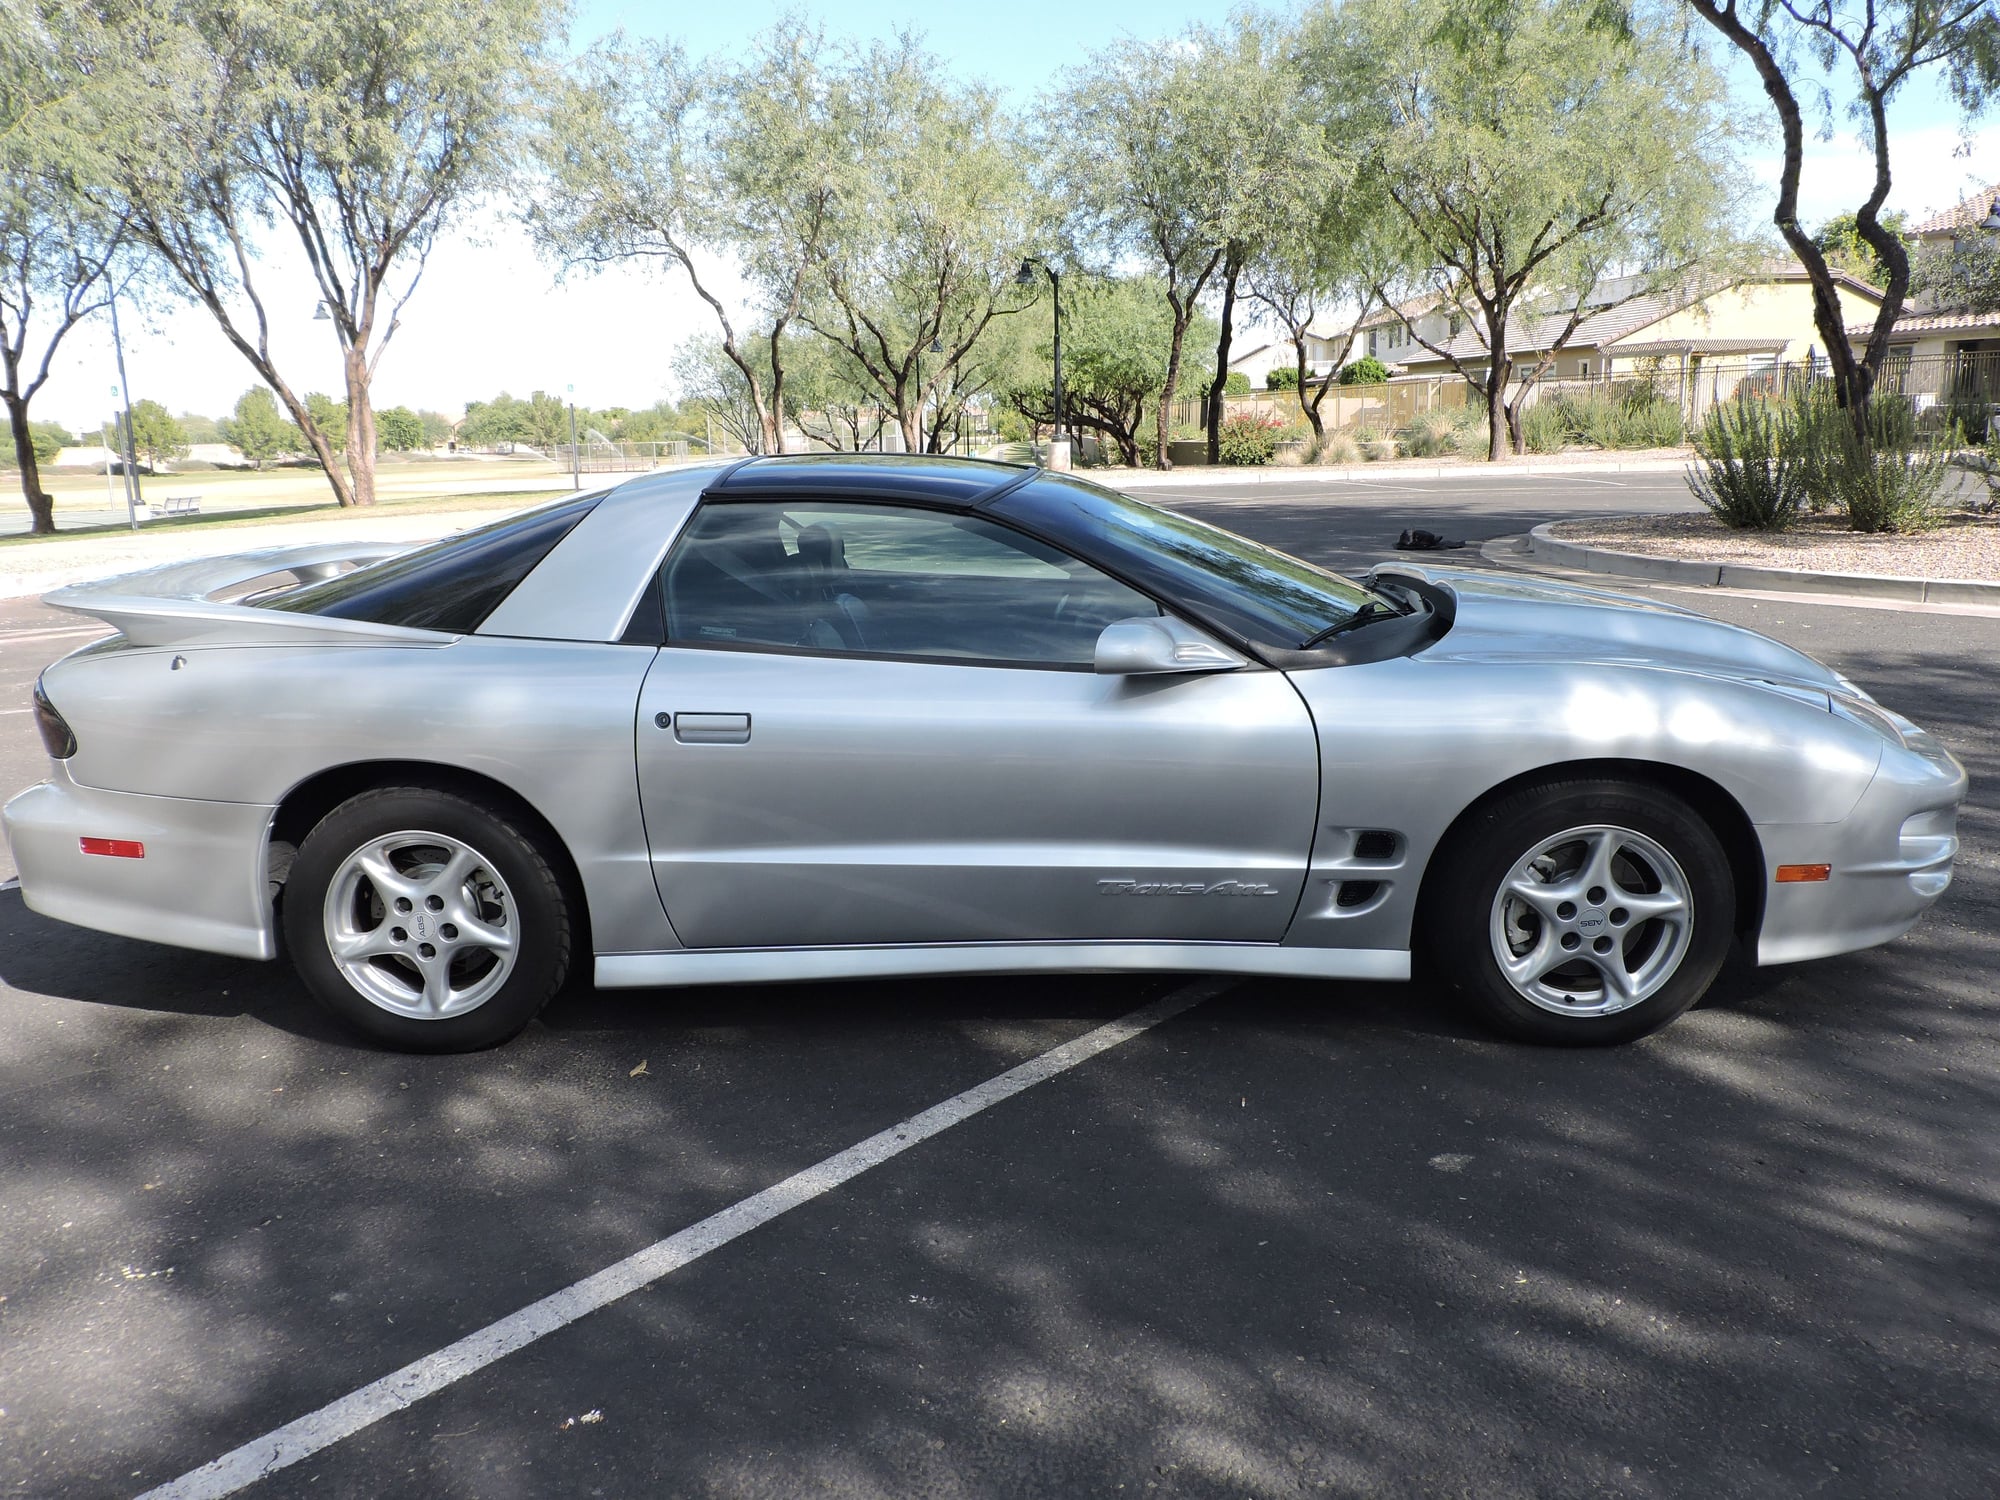 2002 Pontiac Firebird - 17,000 mile Trans Am - Used - VIN 2G2FV22G822132236 - 17,020 Miles - 8 cyl - 2WD - Automatic - Coupe - Silver - Chandler, AZ 85286, United States